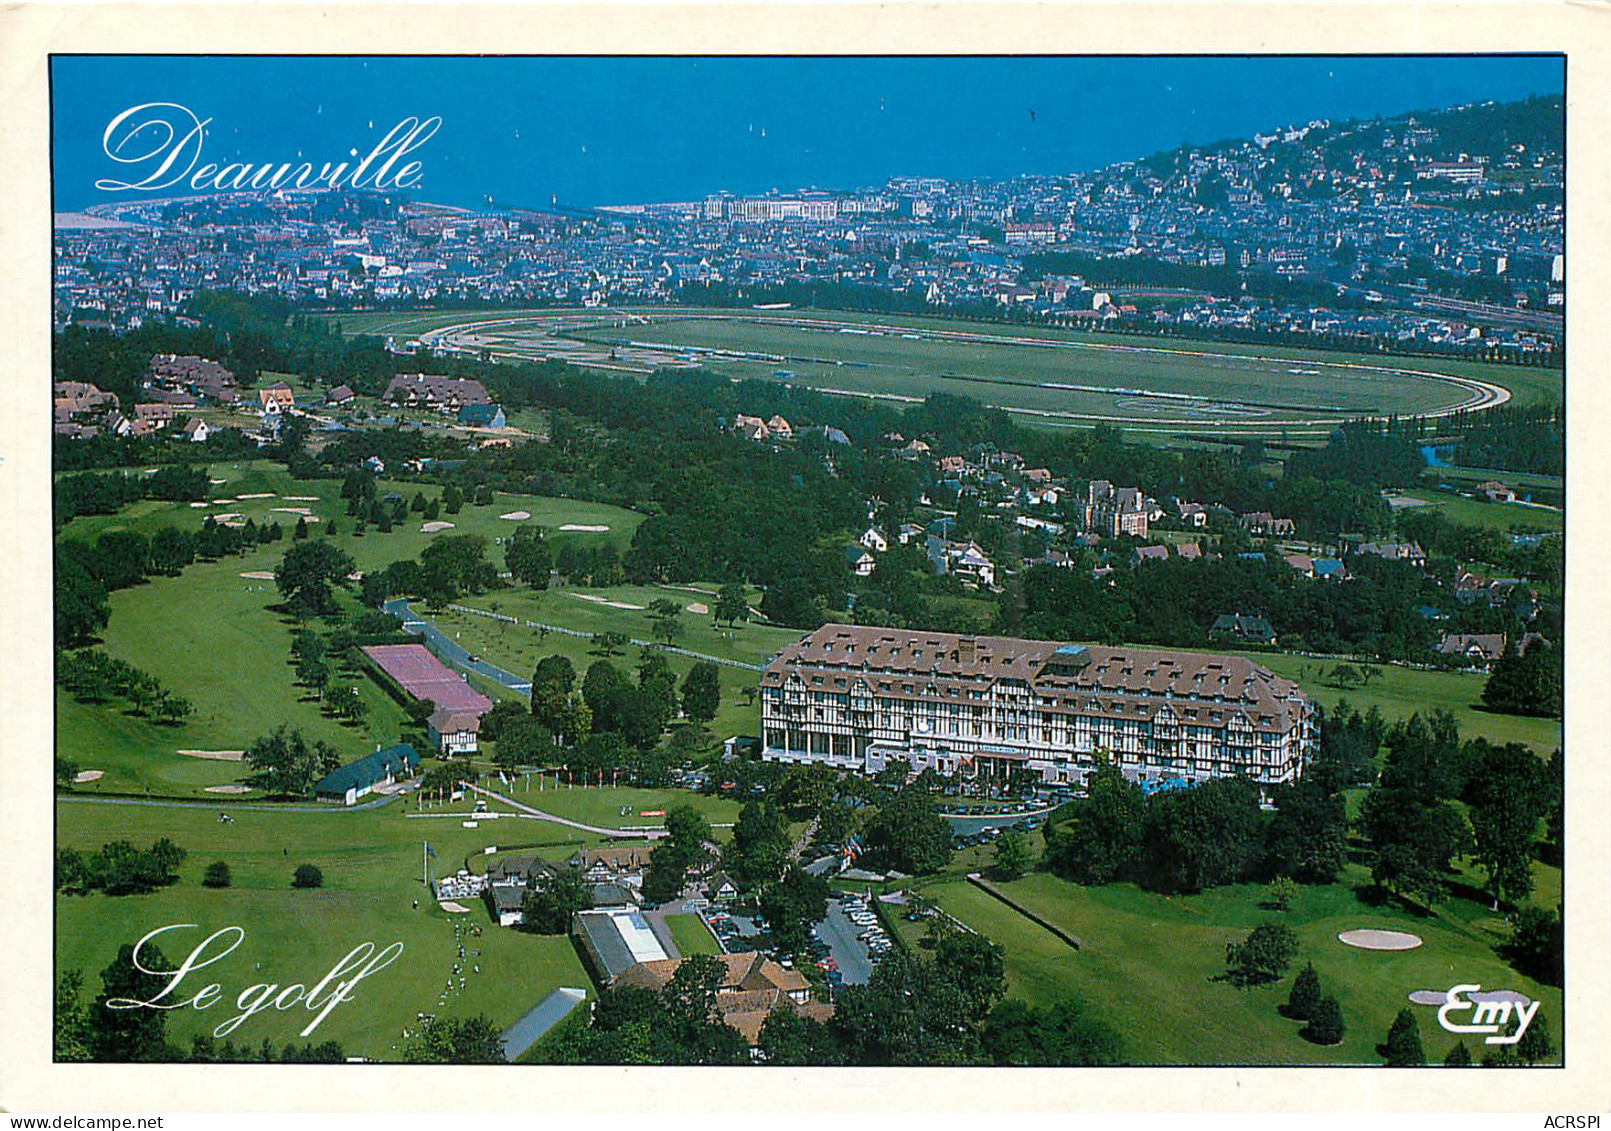 DEAUVILLE L HOTEL DU GOLF 27(scan Recto-verso) MB2386 - Deauville